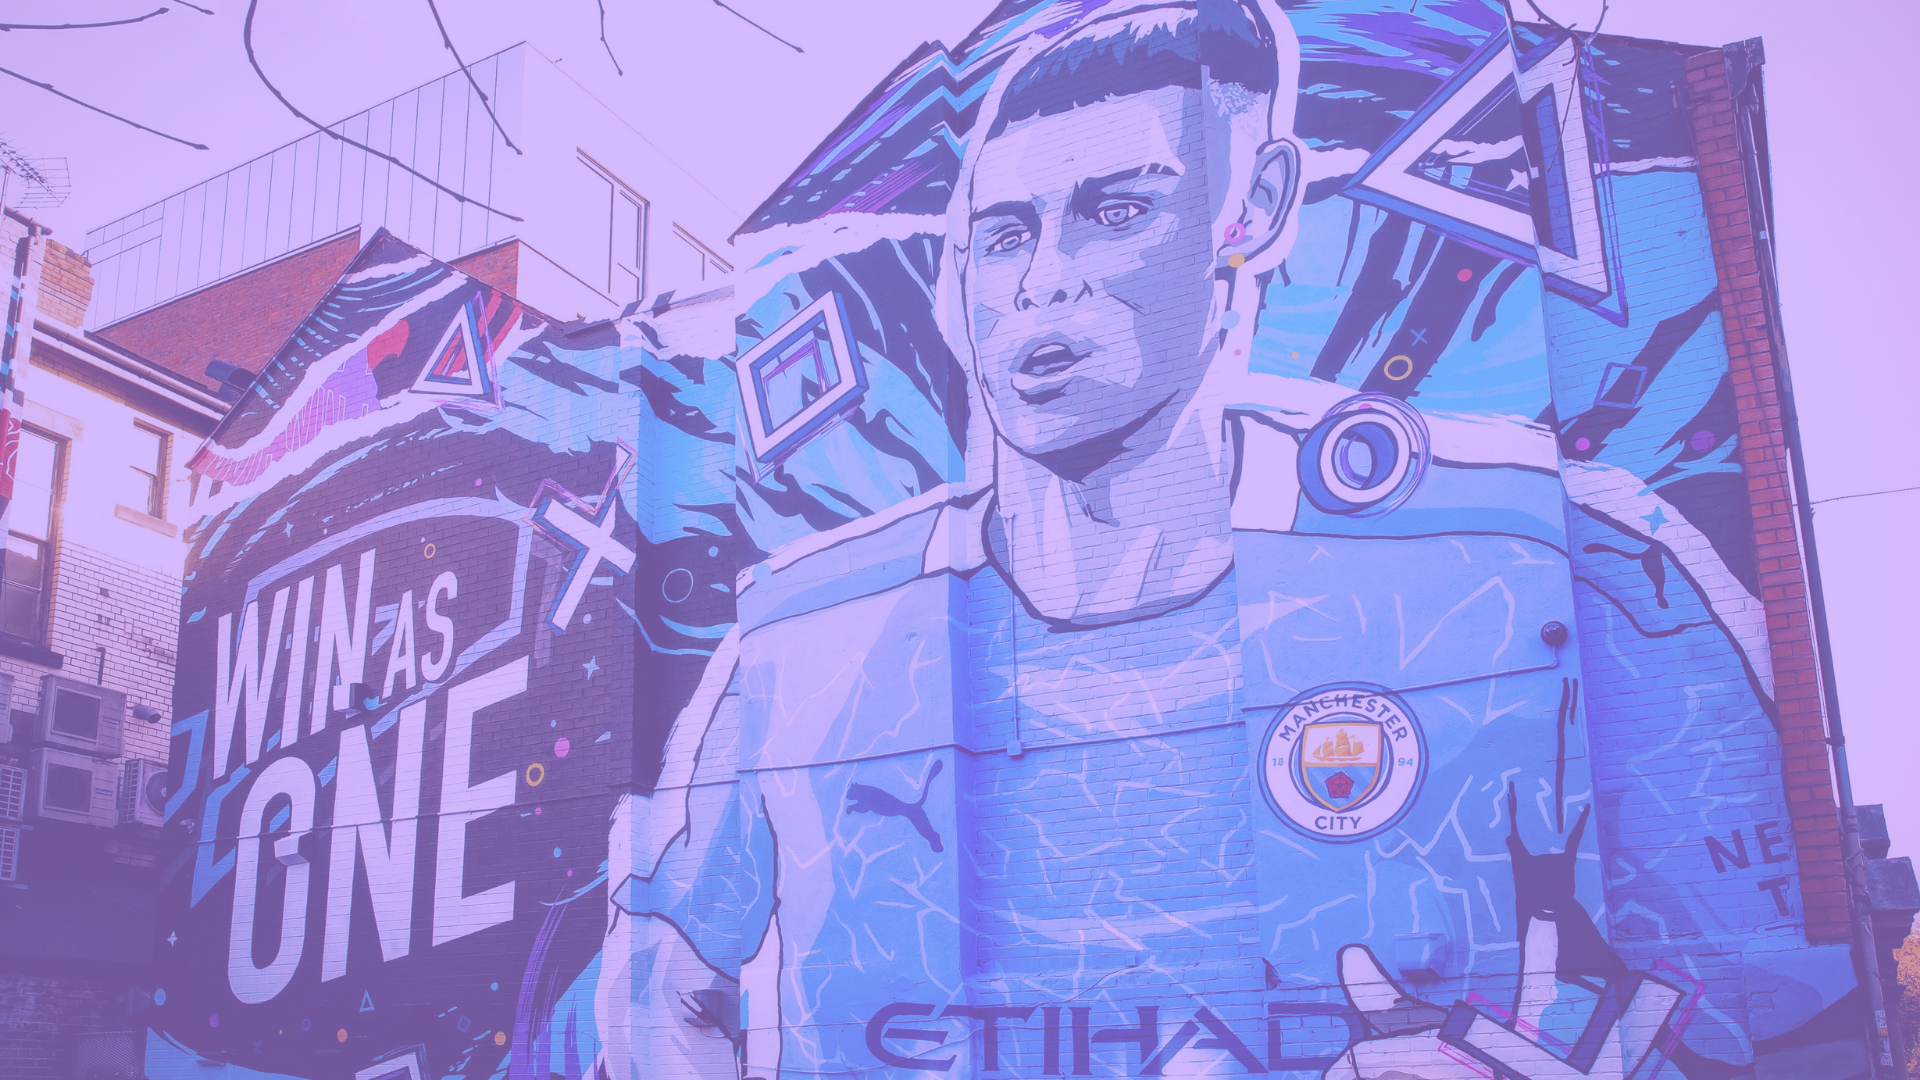 The Spurs & City murals catching our eye